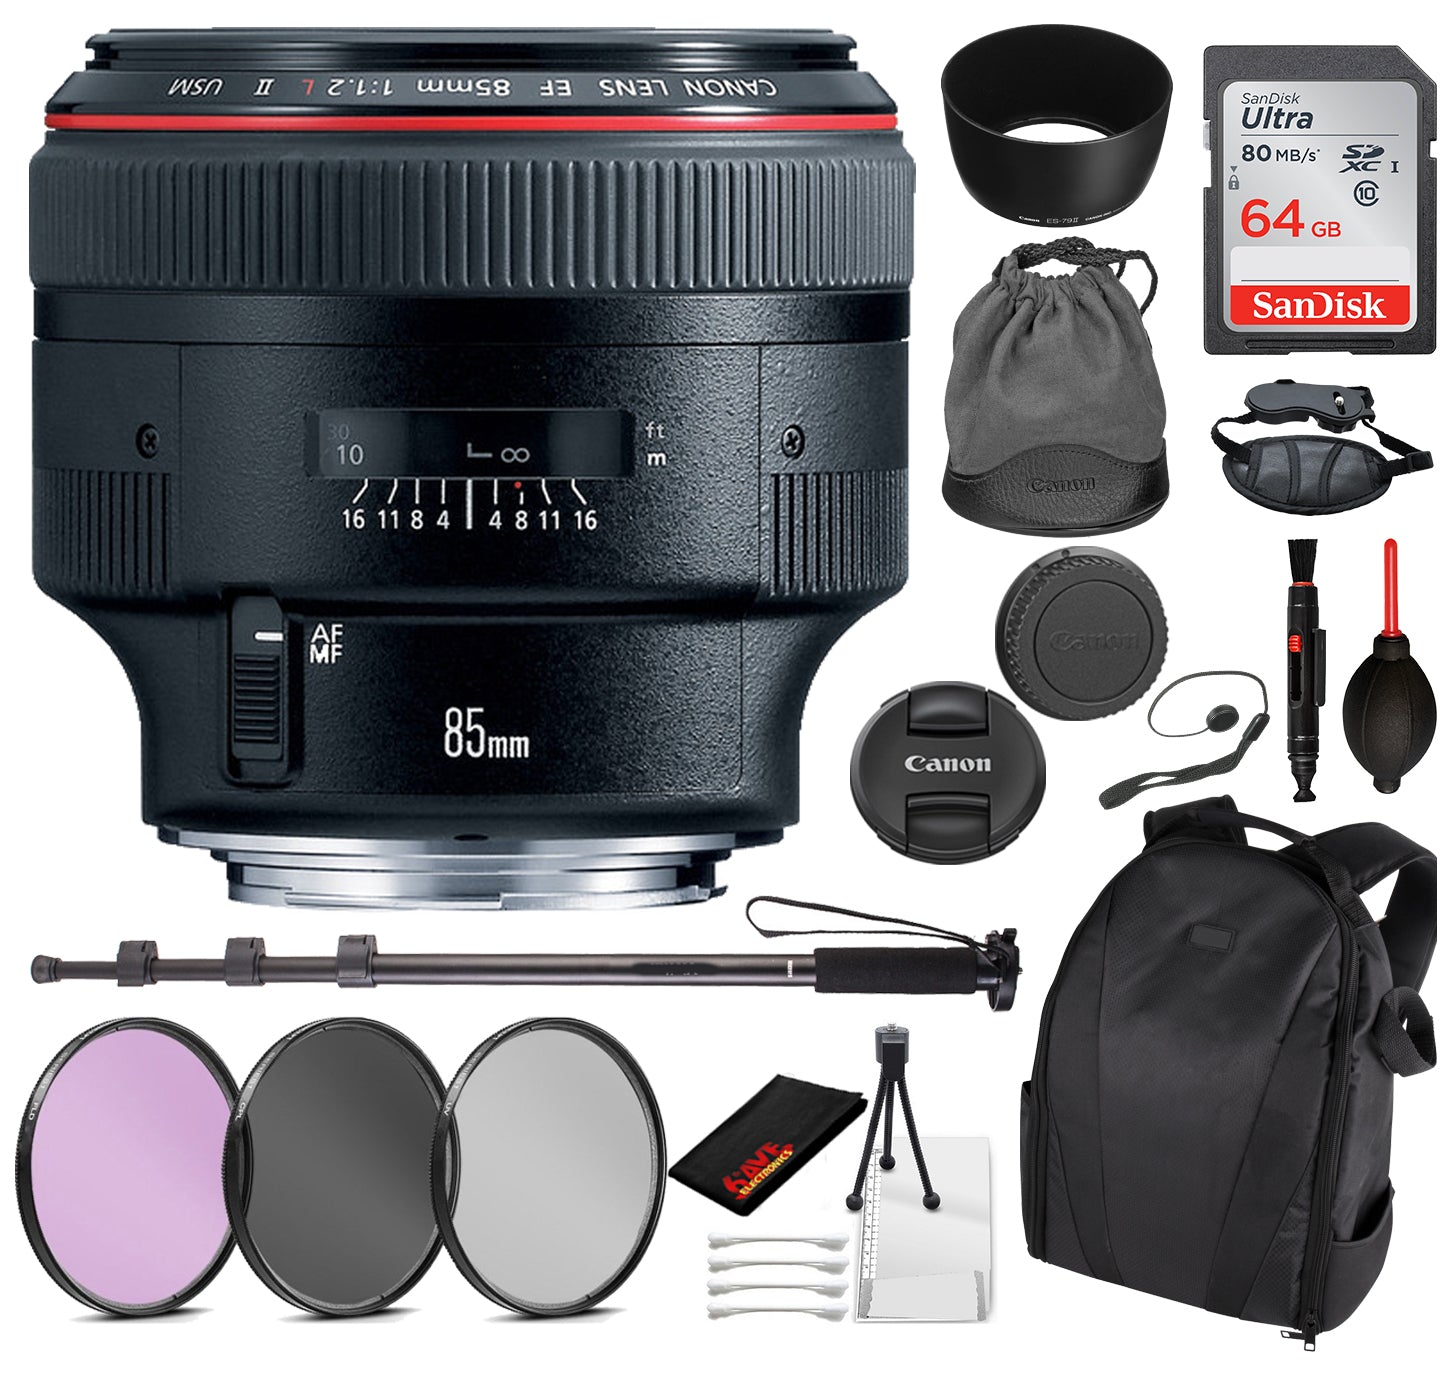 Canon EF 85mm f/1.2L II USM Lens with Essential Bundle Kit for Canon EOS - International Model No Warranty